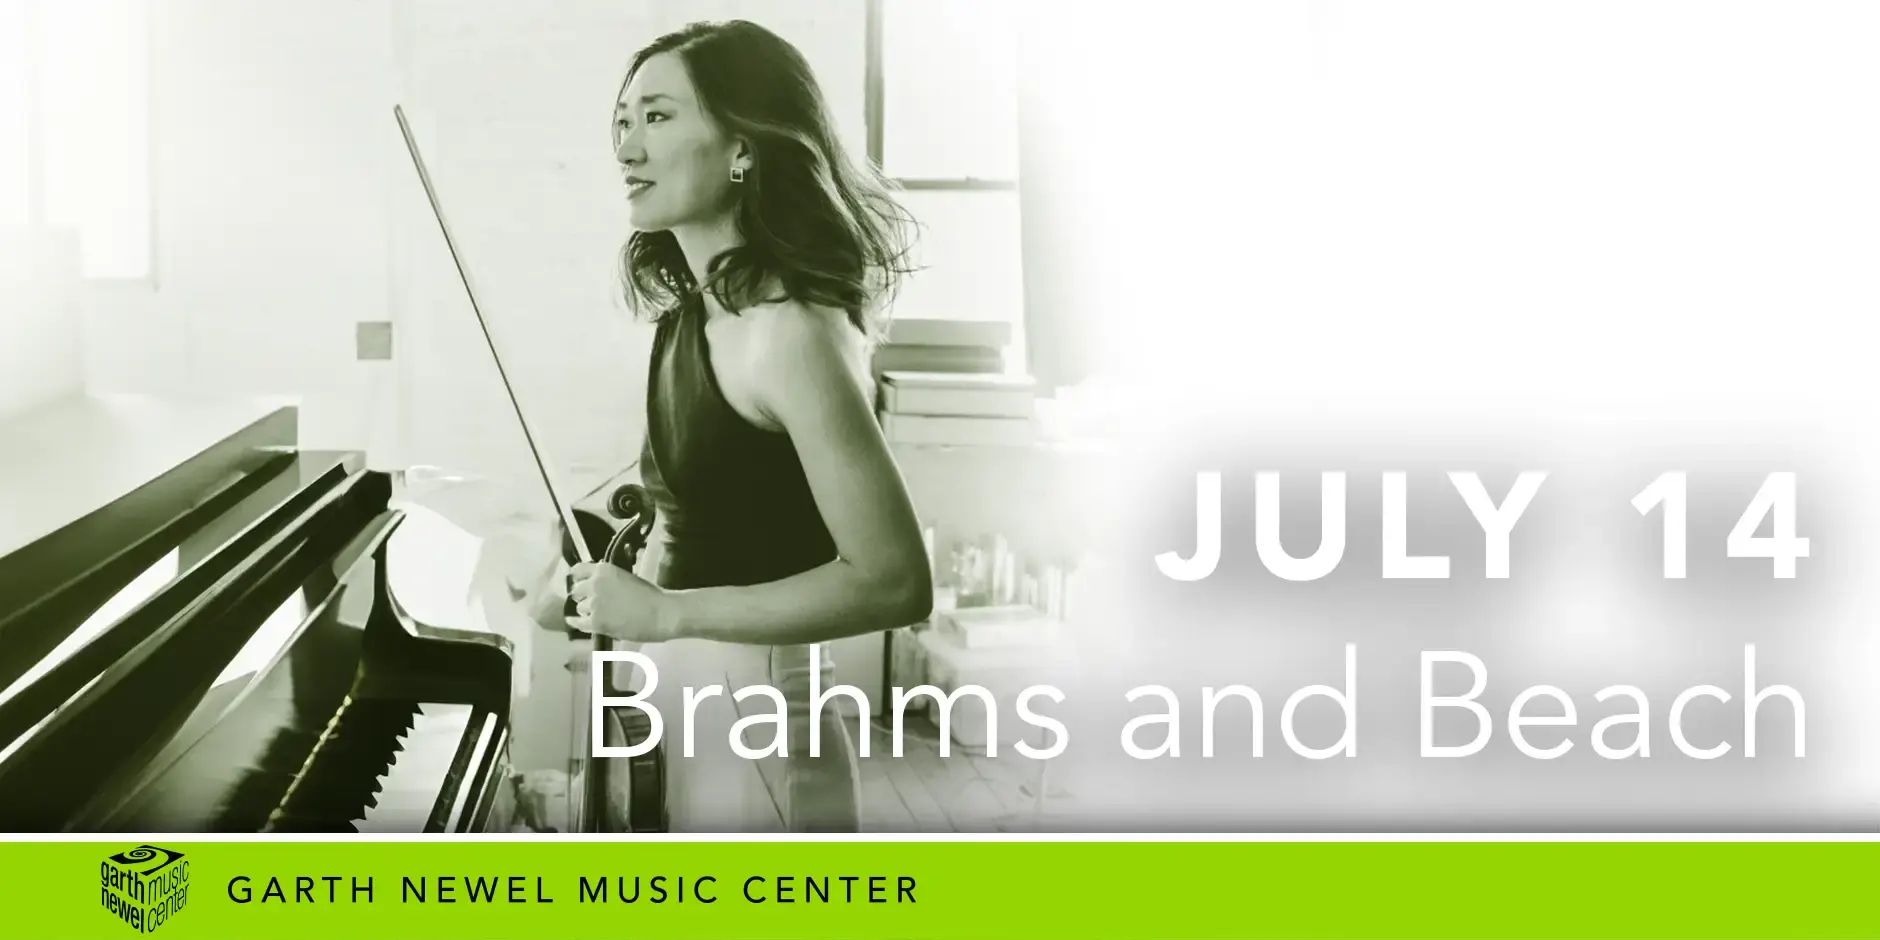 July 14 - Brahms and Beach. GNPQ with violinist Yvonne Lam